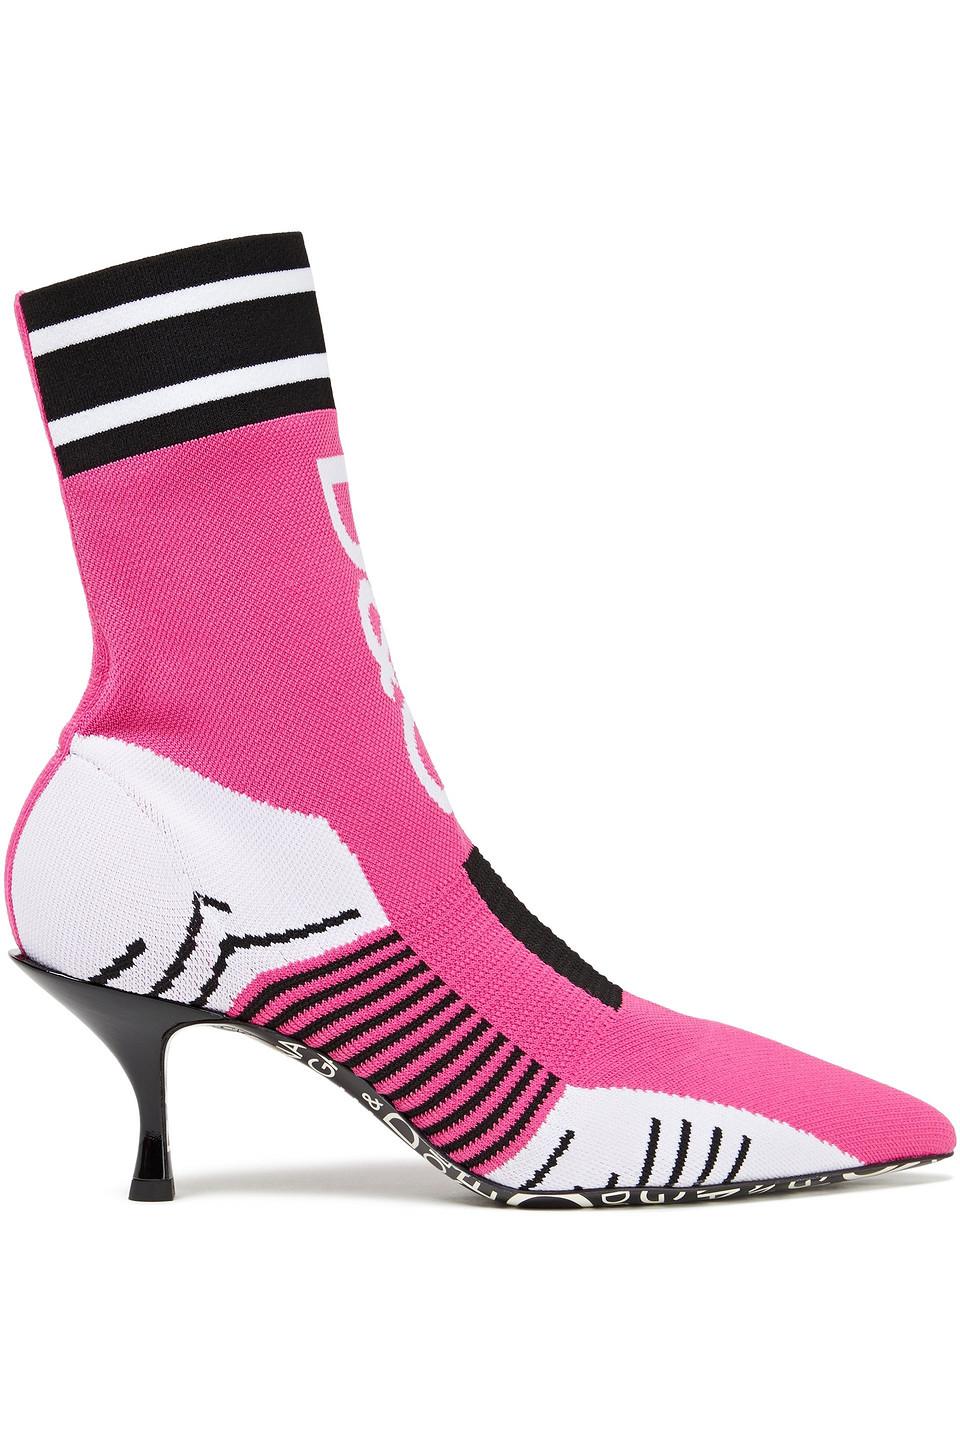 Dolce & Gabbana Leather Jacquard-knit Sock Boots in Fuchsia (Pink 